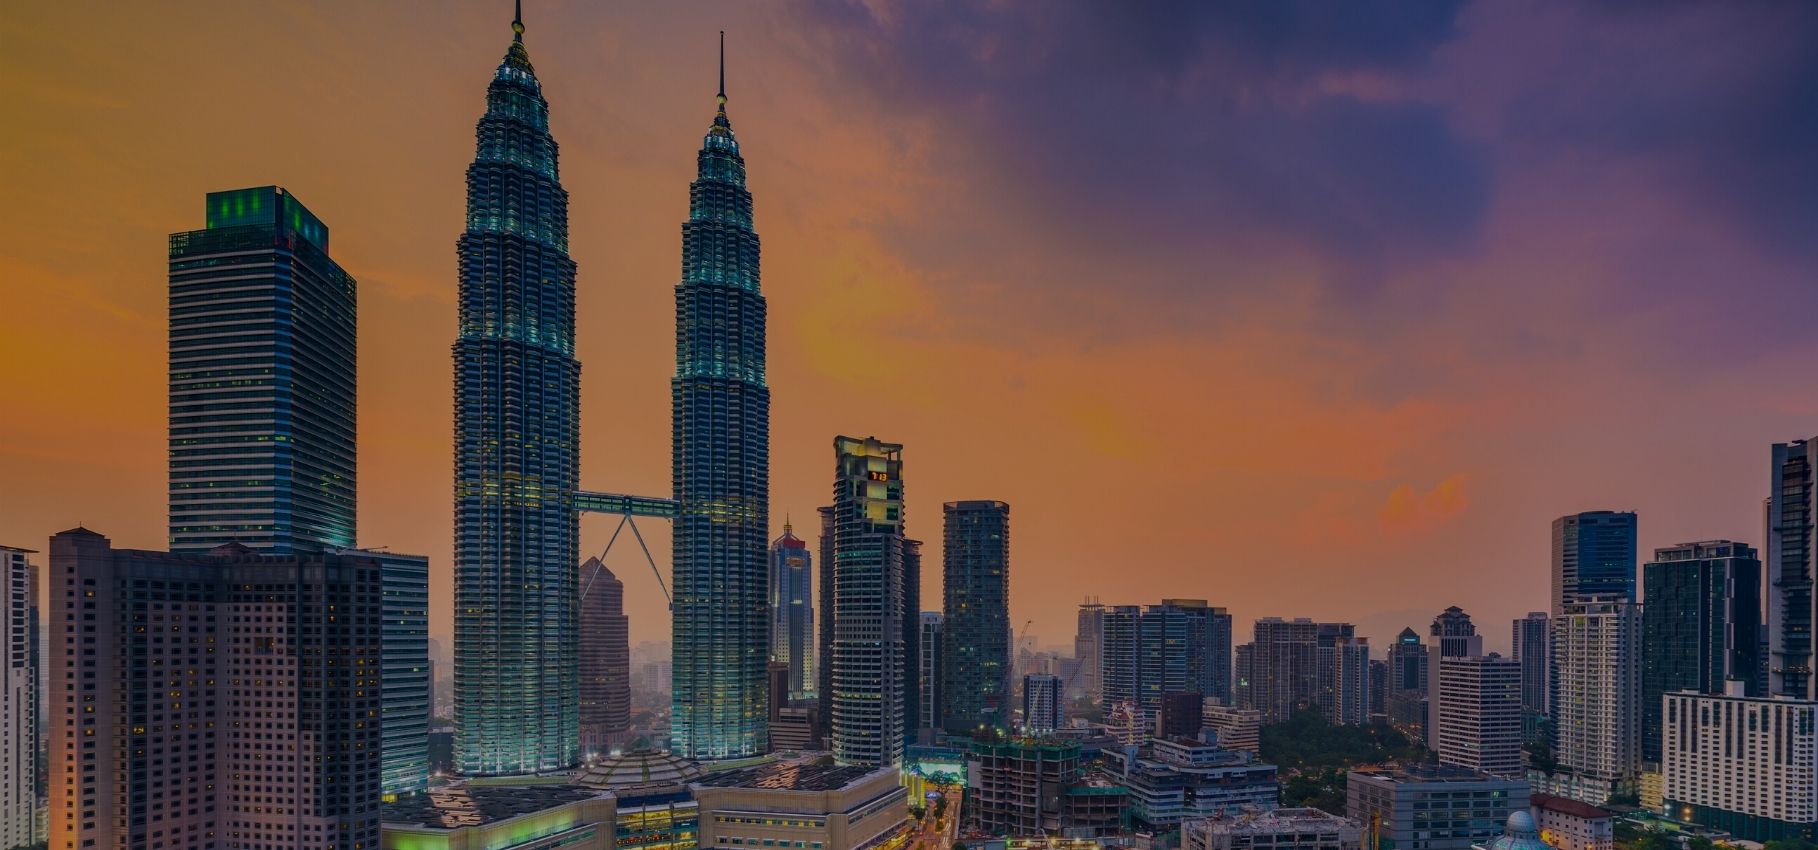 Best places to visit in Kuala Lumpur, Malaysia